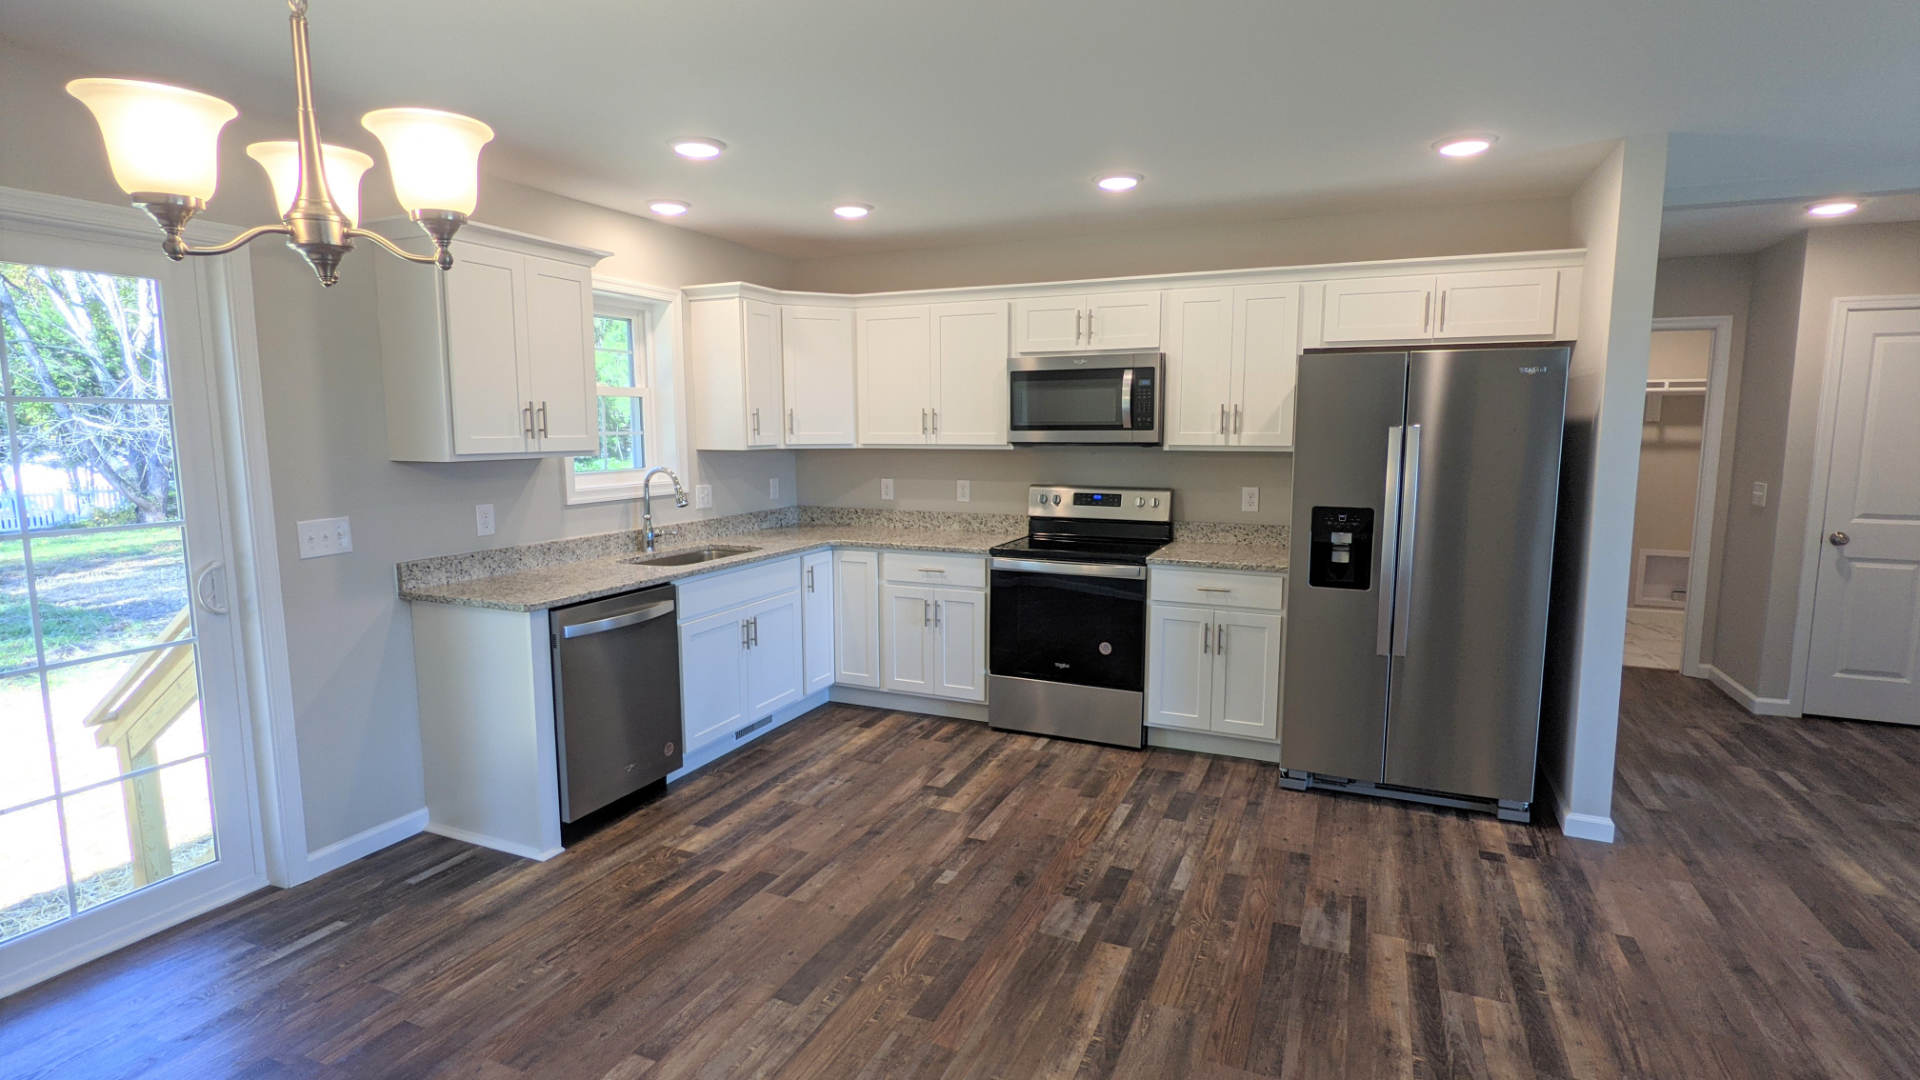 The Birch Kitchen, Seely Homes, Delaware